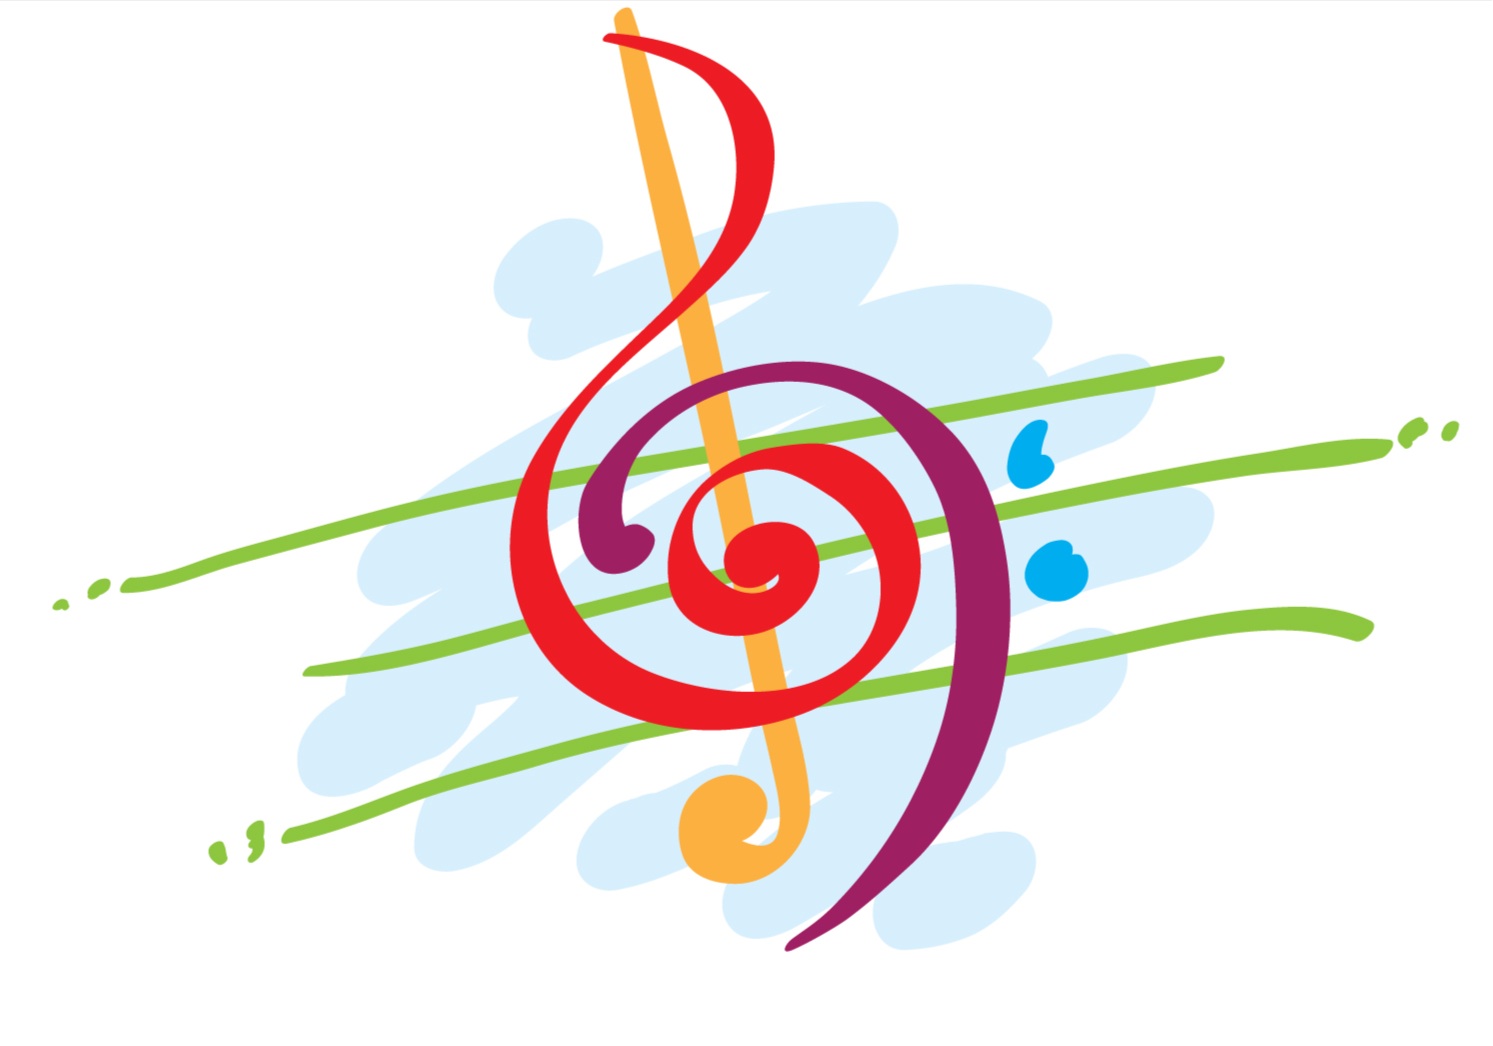 Free Colorful Music Notes Clipart Image - 8637, Colored Music ...